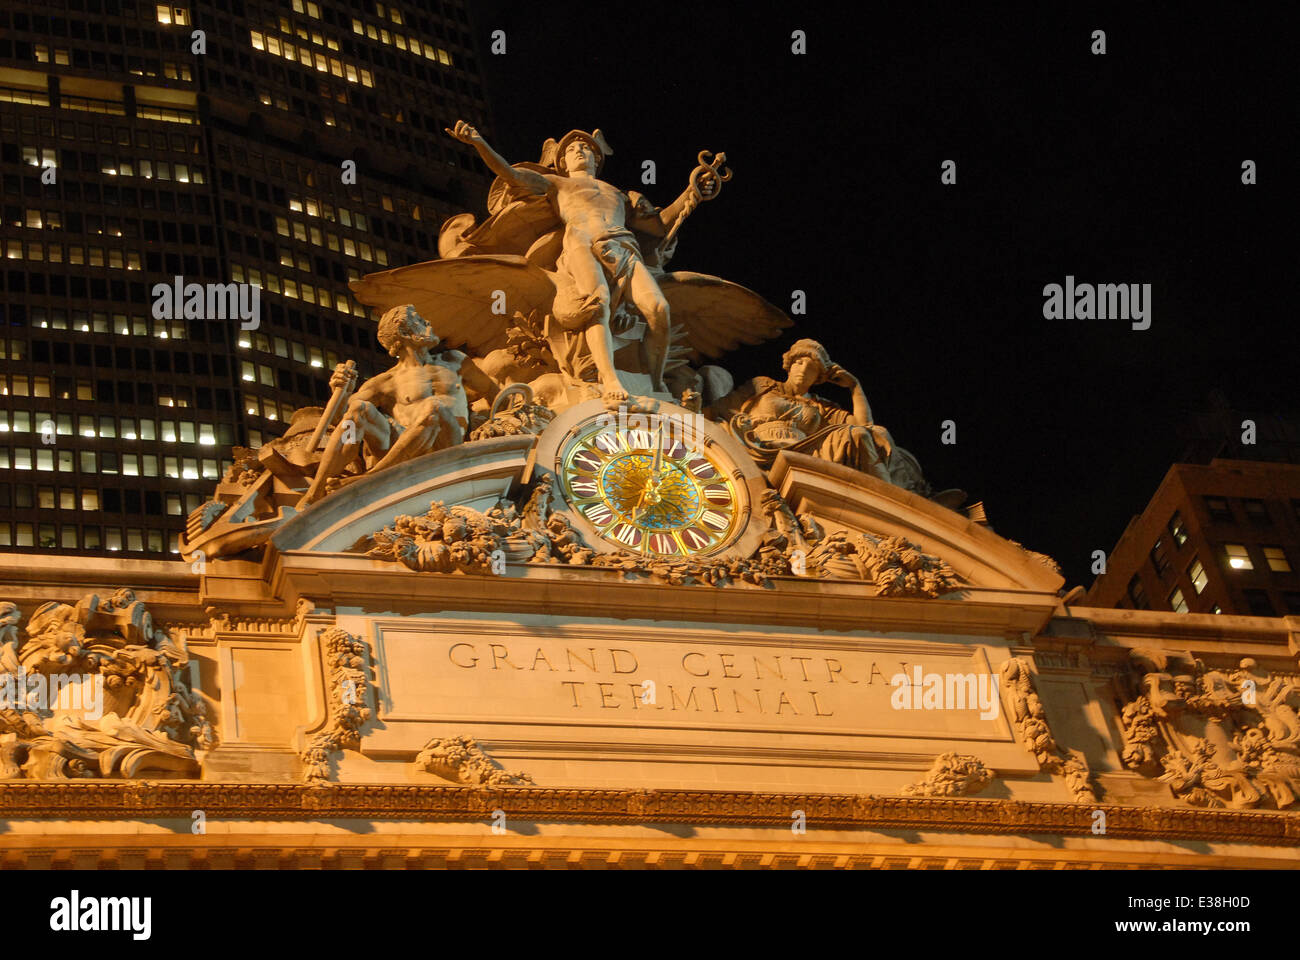 clock at the grand central station by night in new york, usa Stock Photo